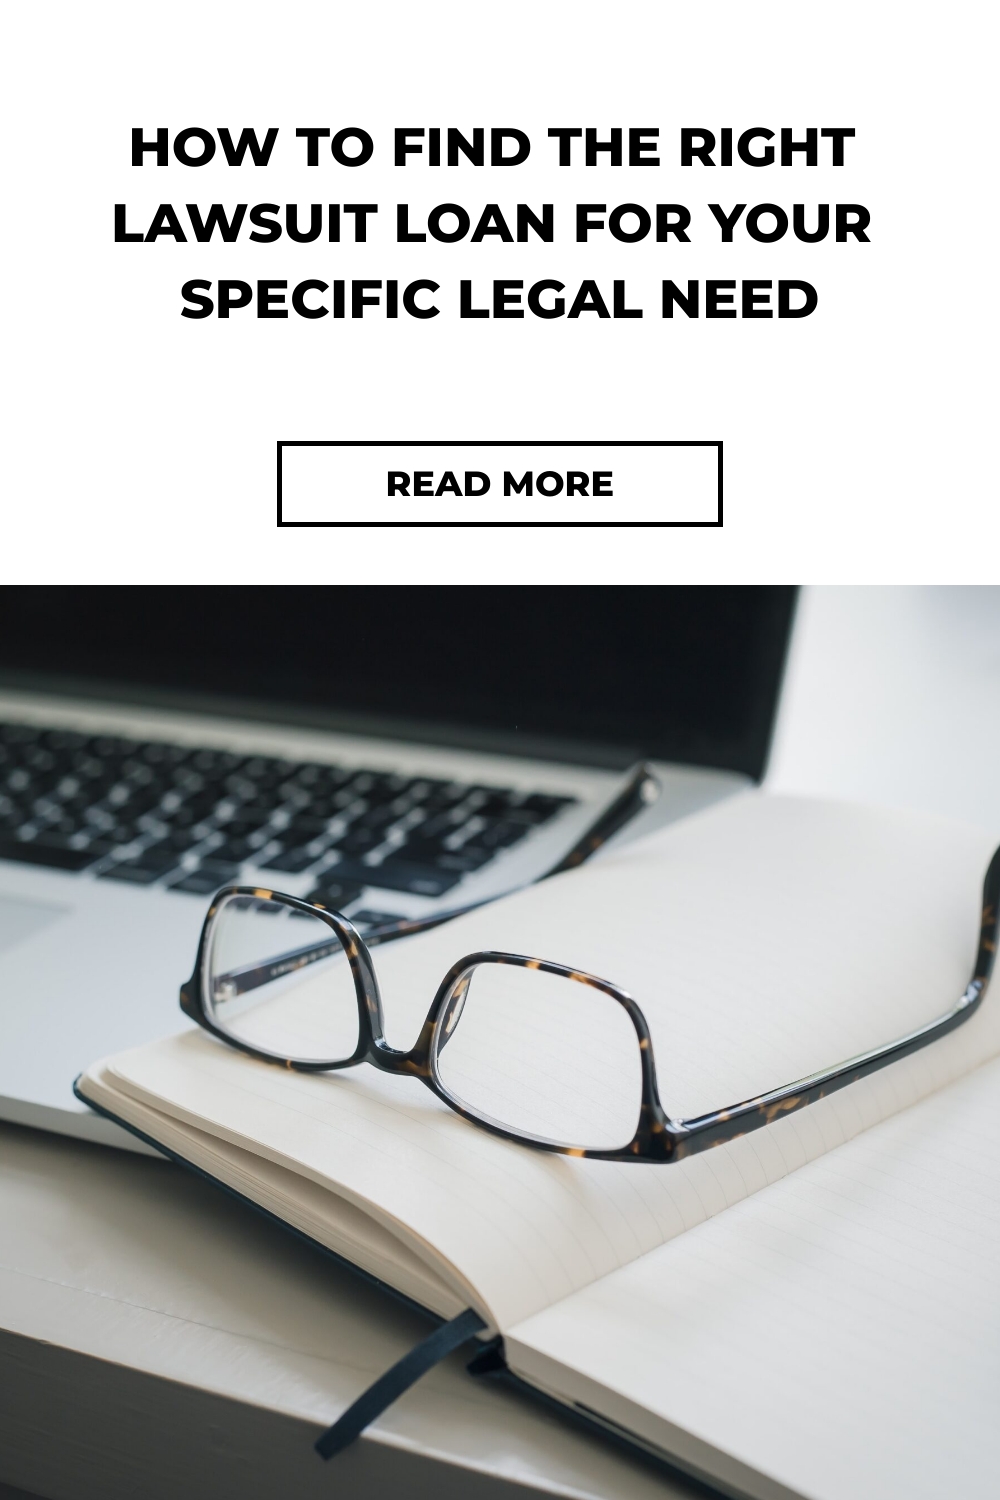 How To Find The Right Lawsuit Loan For Your Specific Legal Need